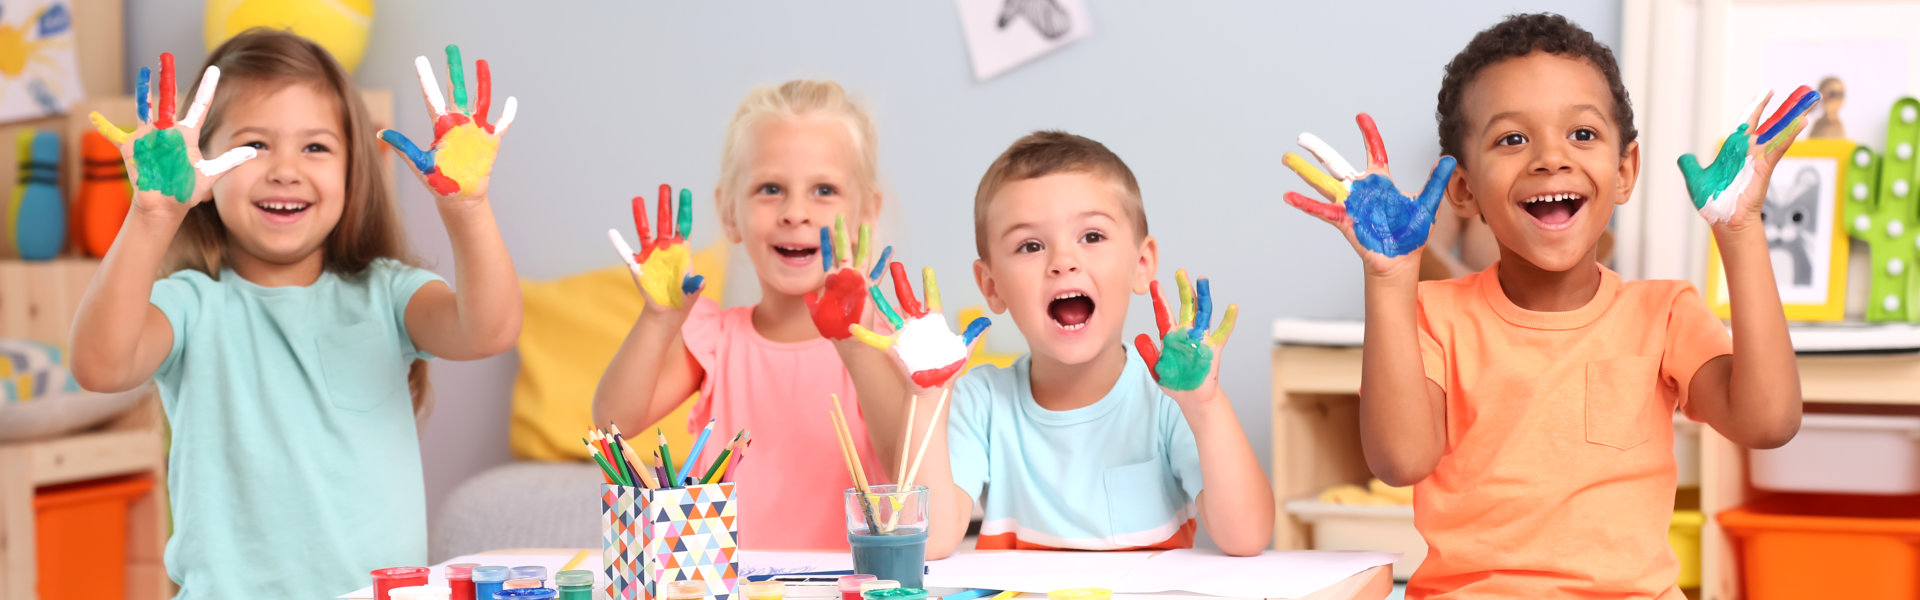 kids showing their hands with paint